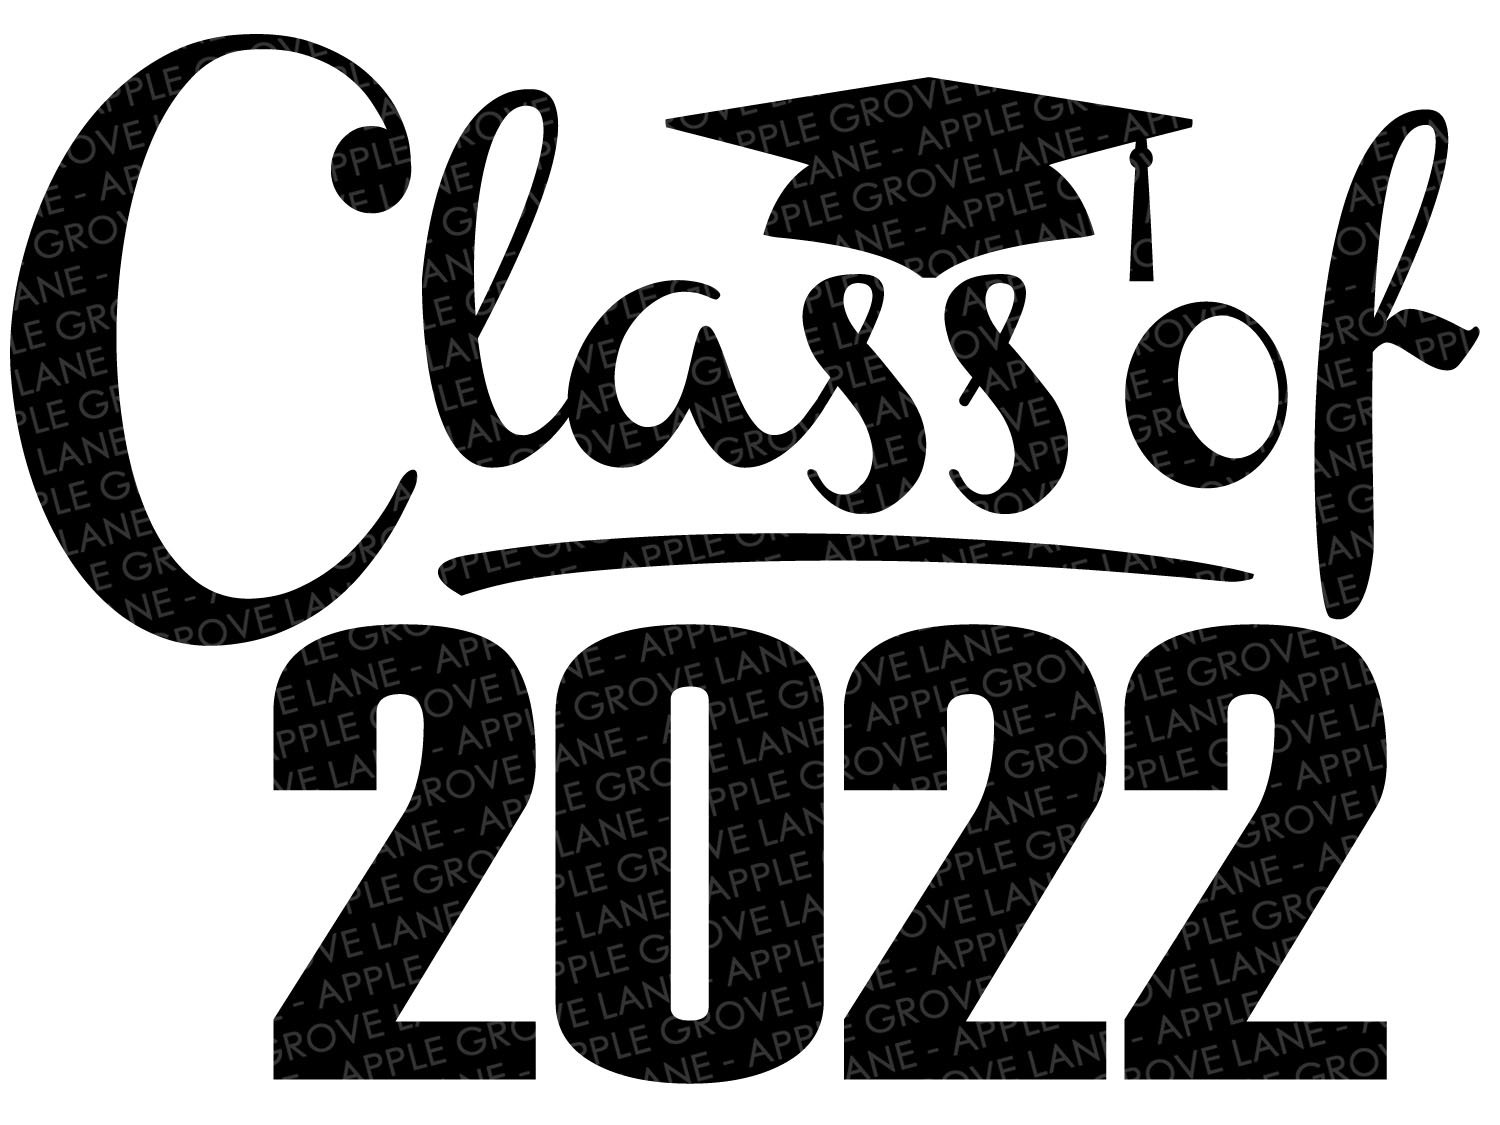 840 Graduation 2022 Stock Photos Pictures  RoyaltyFree Images  iStock